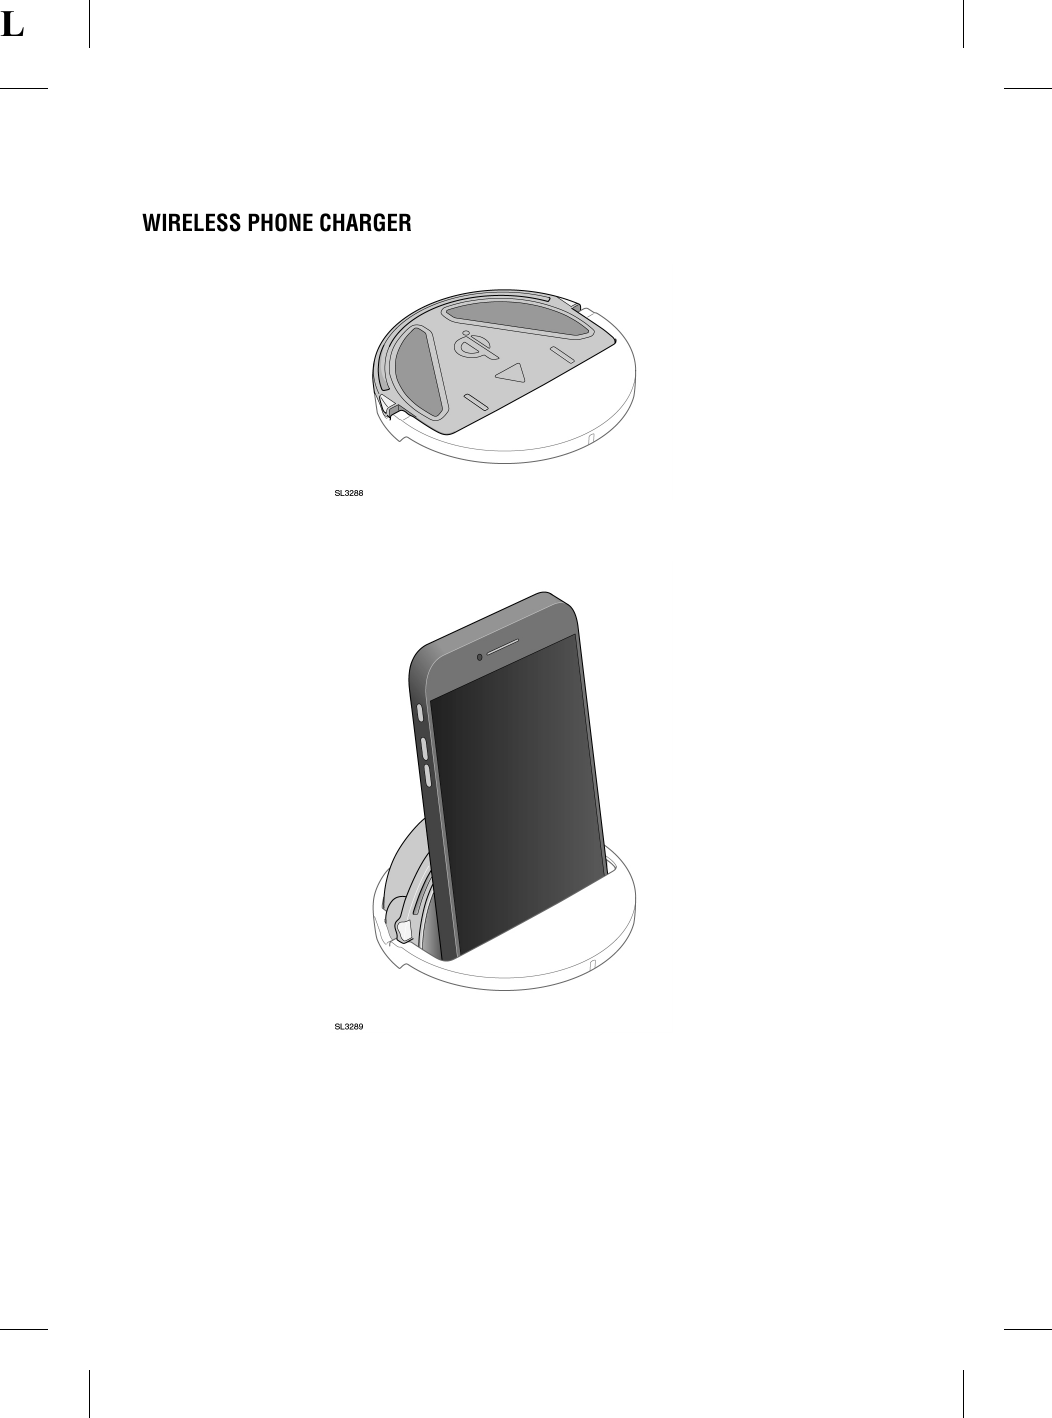 LWIRELESS PHONE CHARGER